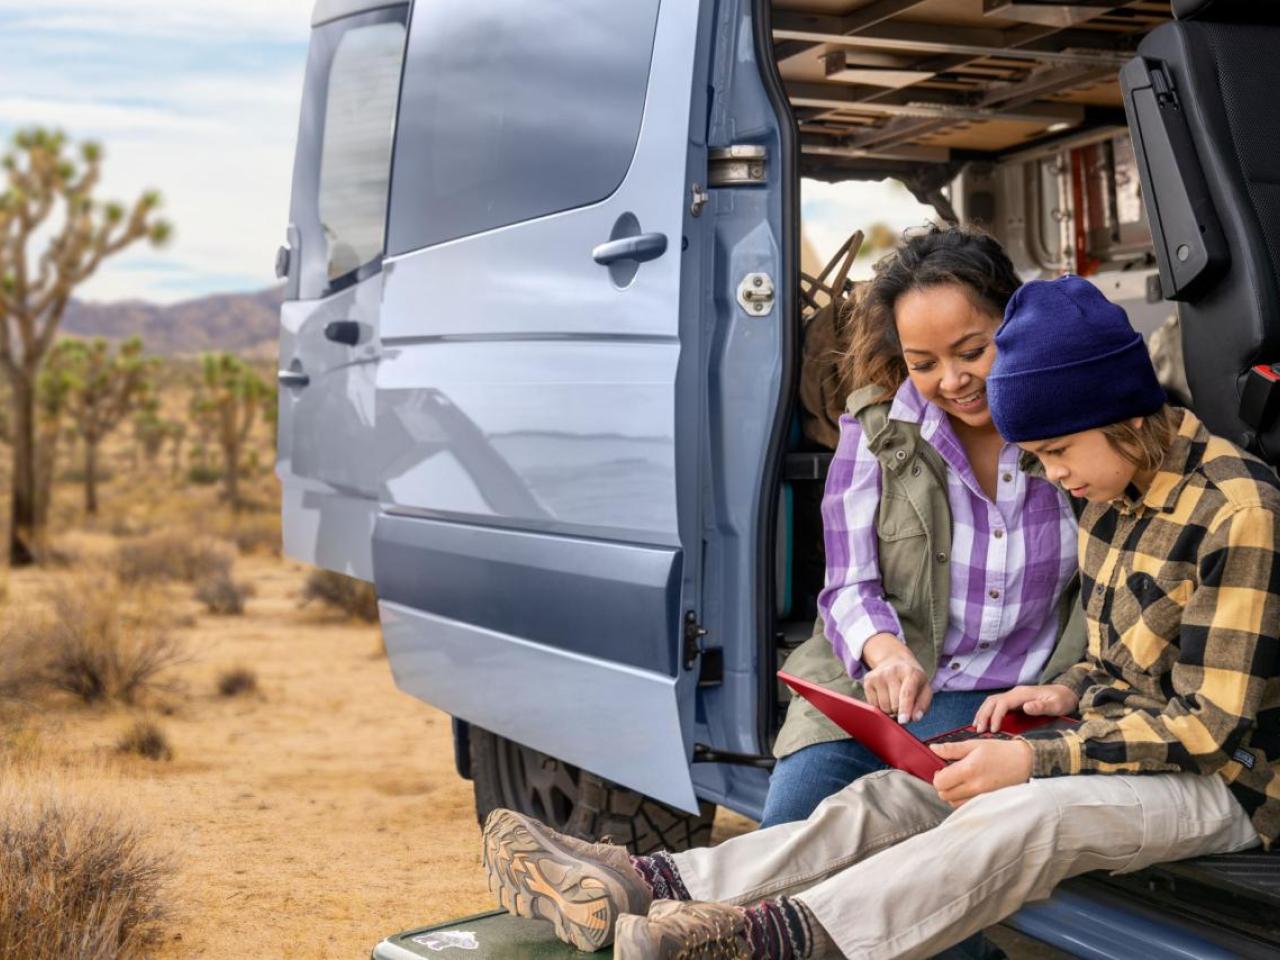 An adult and hild looking at an electronic tablet while sitting in the open side of a van in an arid area.